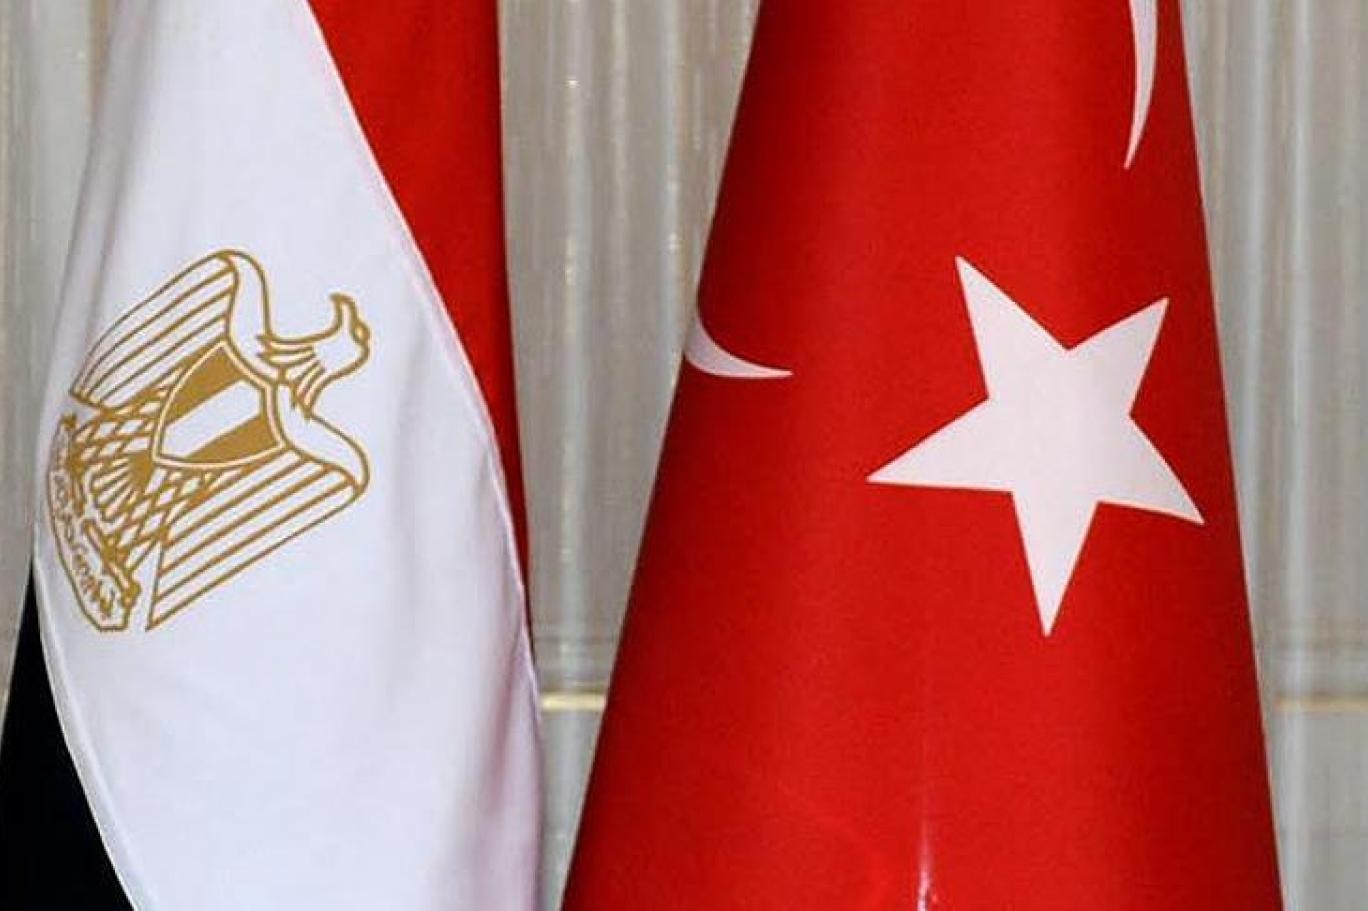 The volume of trade exchange between Turkey and Egypt